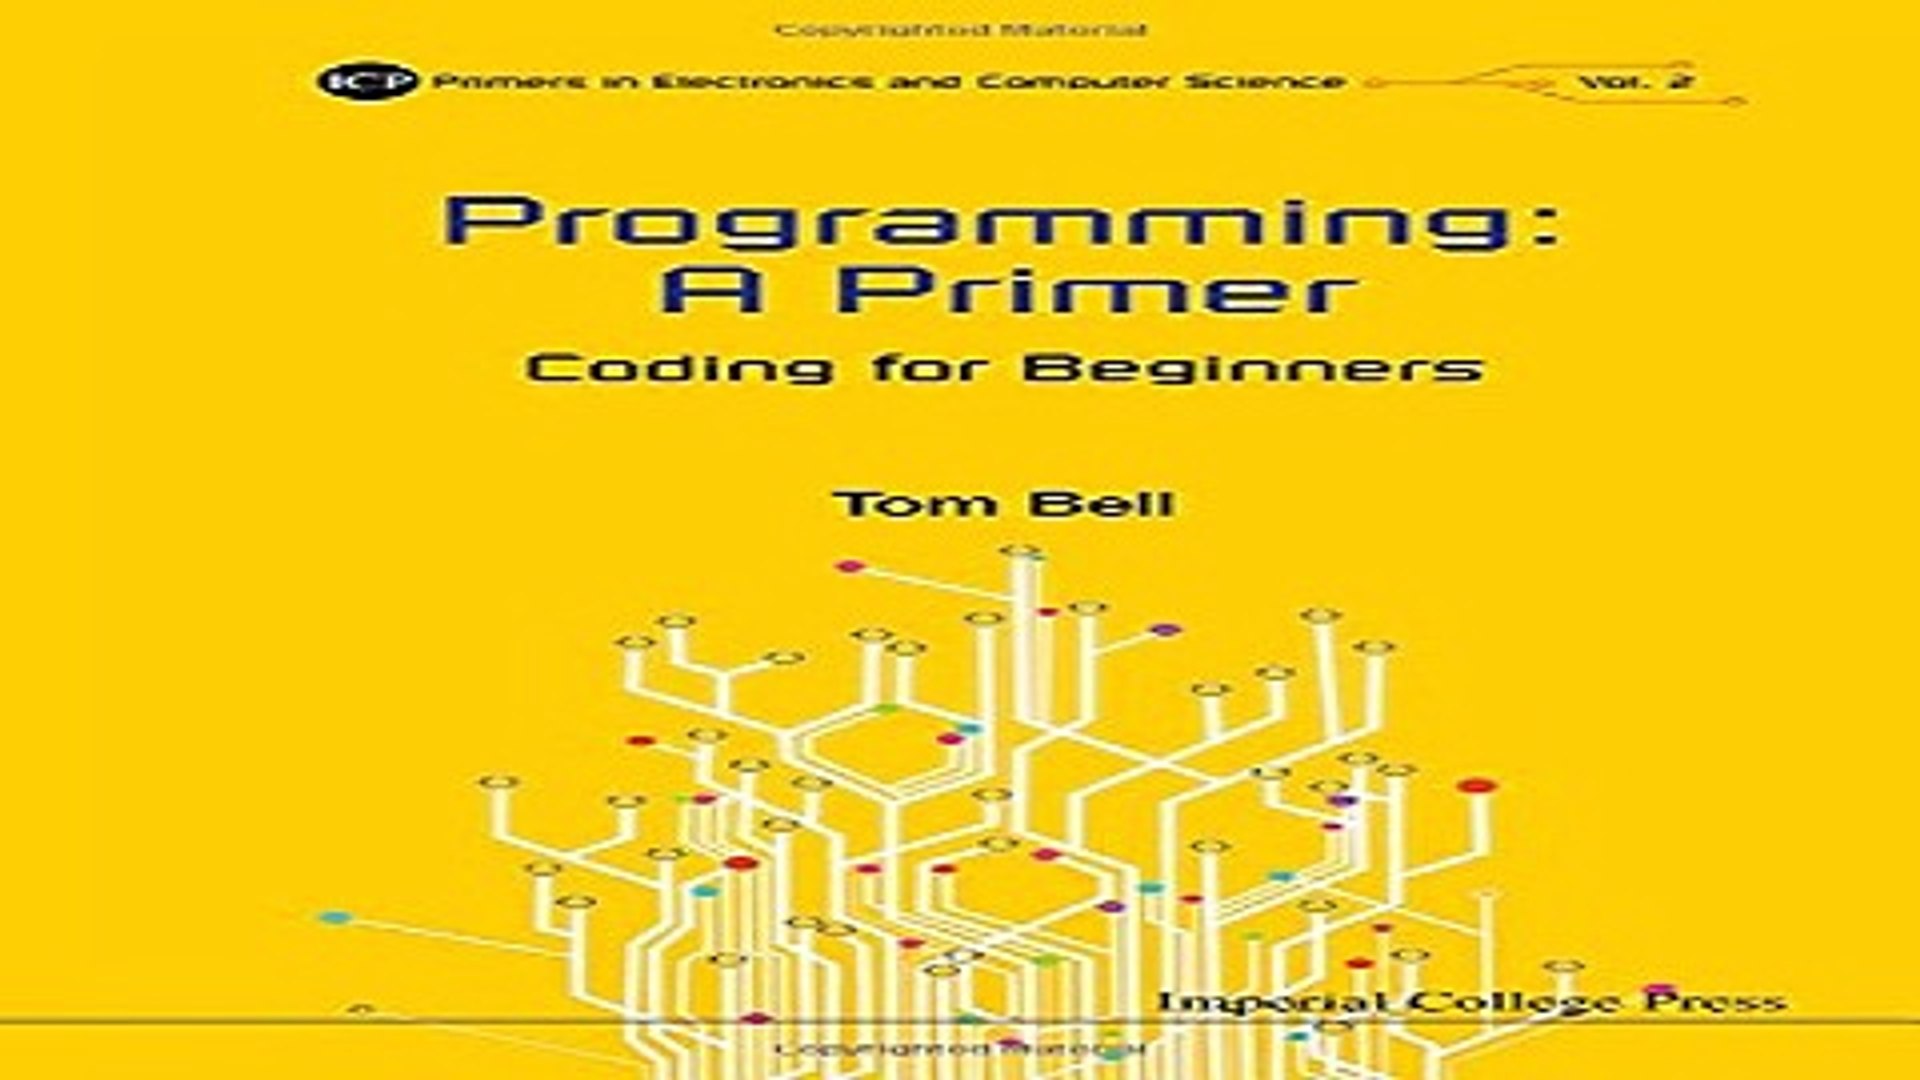 Download Programming  A Primer  Coding for Beginners  Icp Primers in Electronics and Computer